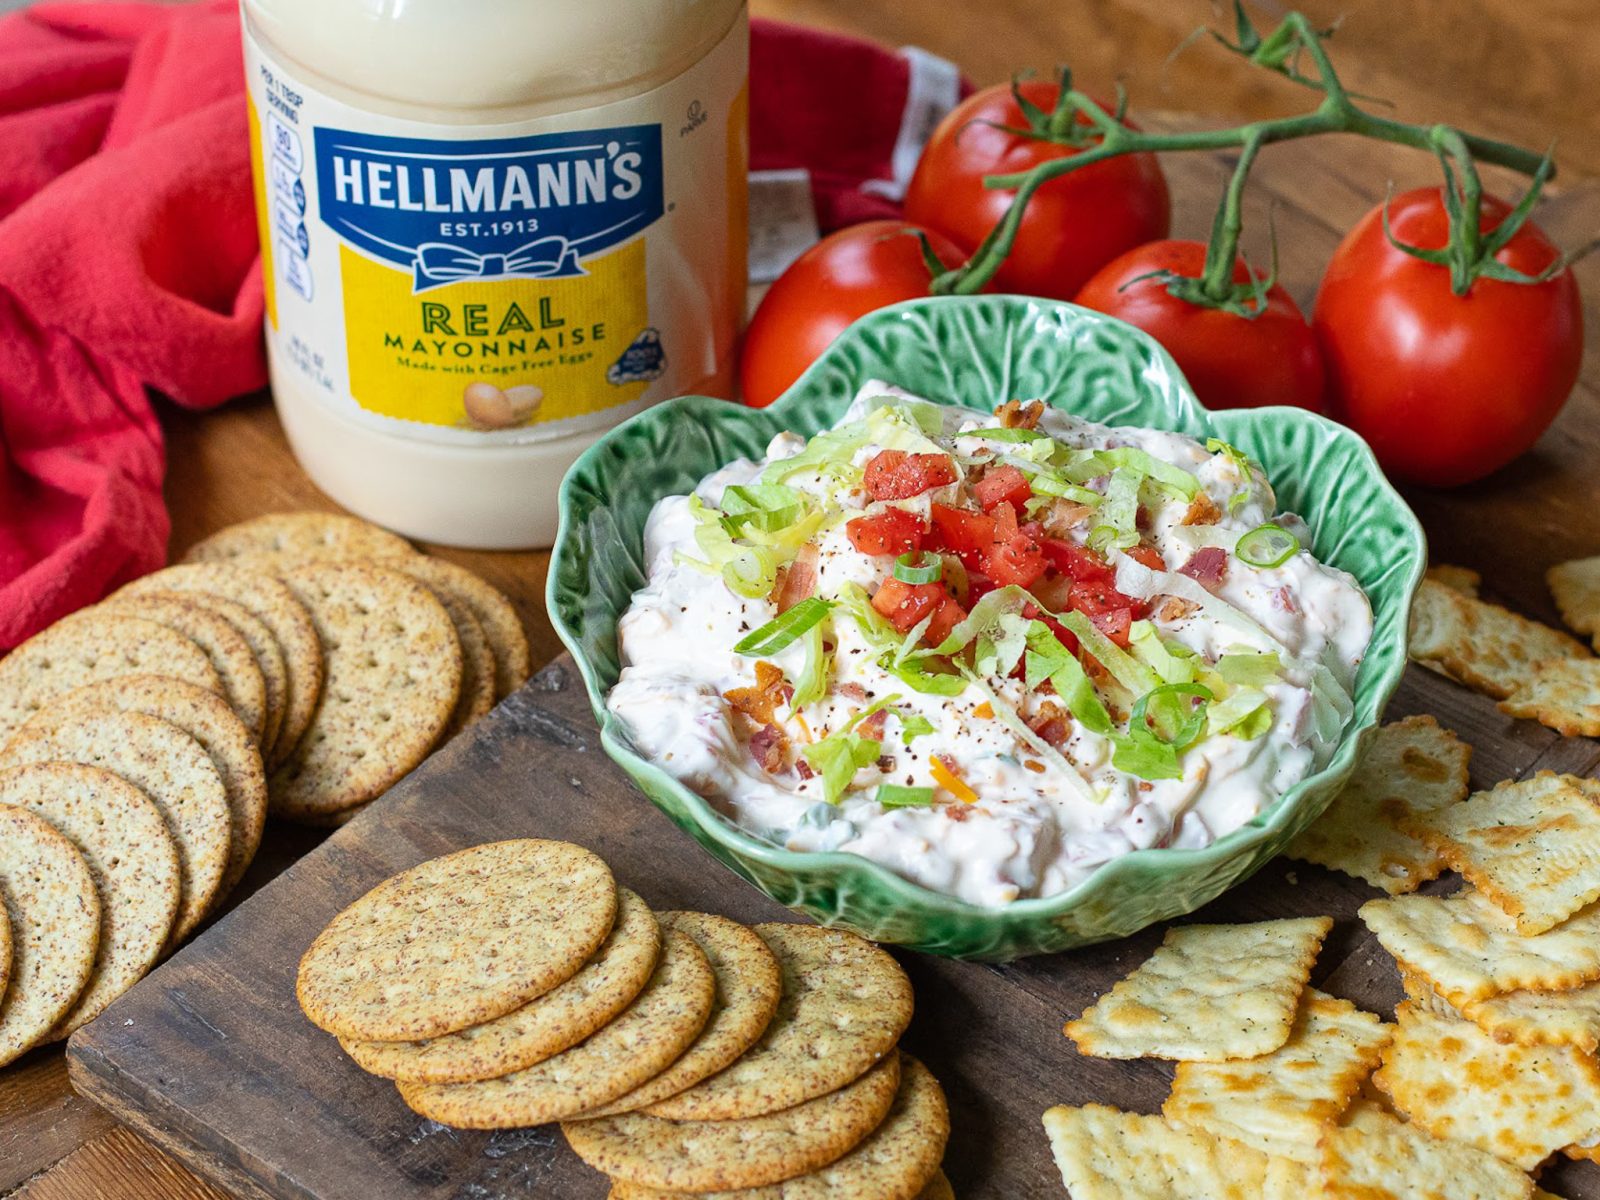 Stock Up On Big Jars Of Hellmann’s Mayonnaise During The Publix BOGO Sale (Perfect For Game Day BLT Dip)